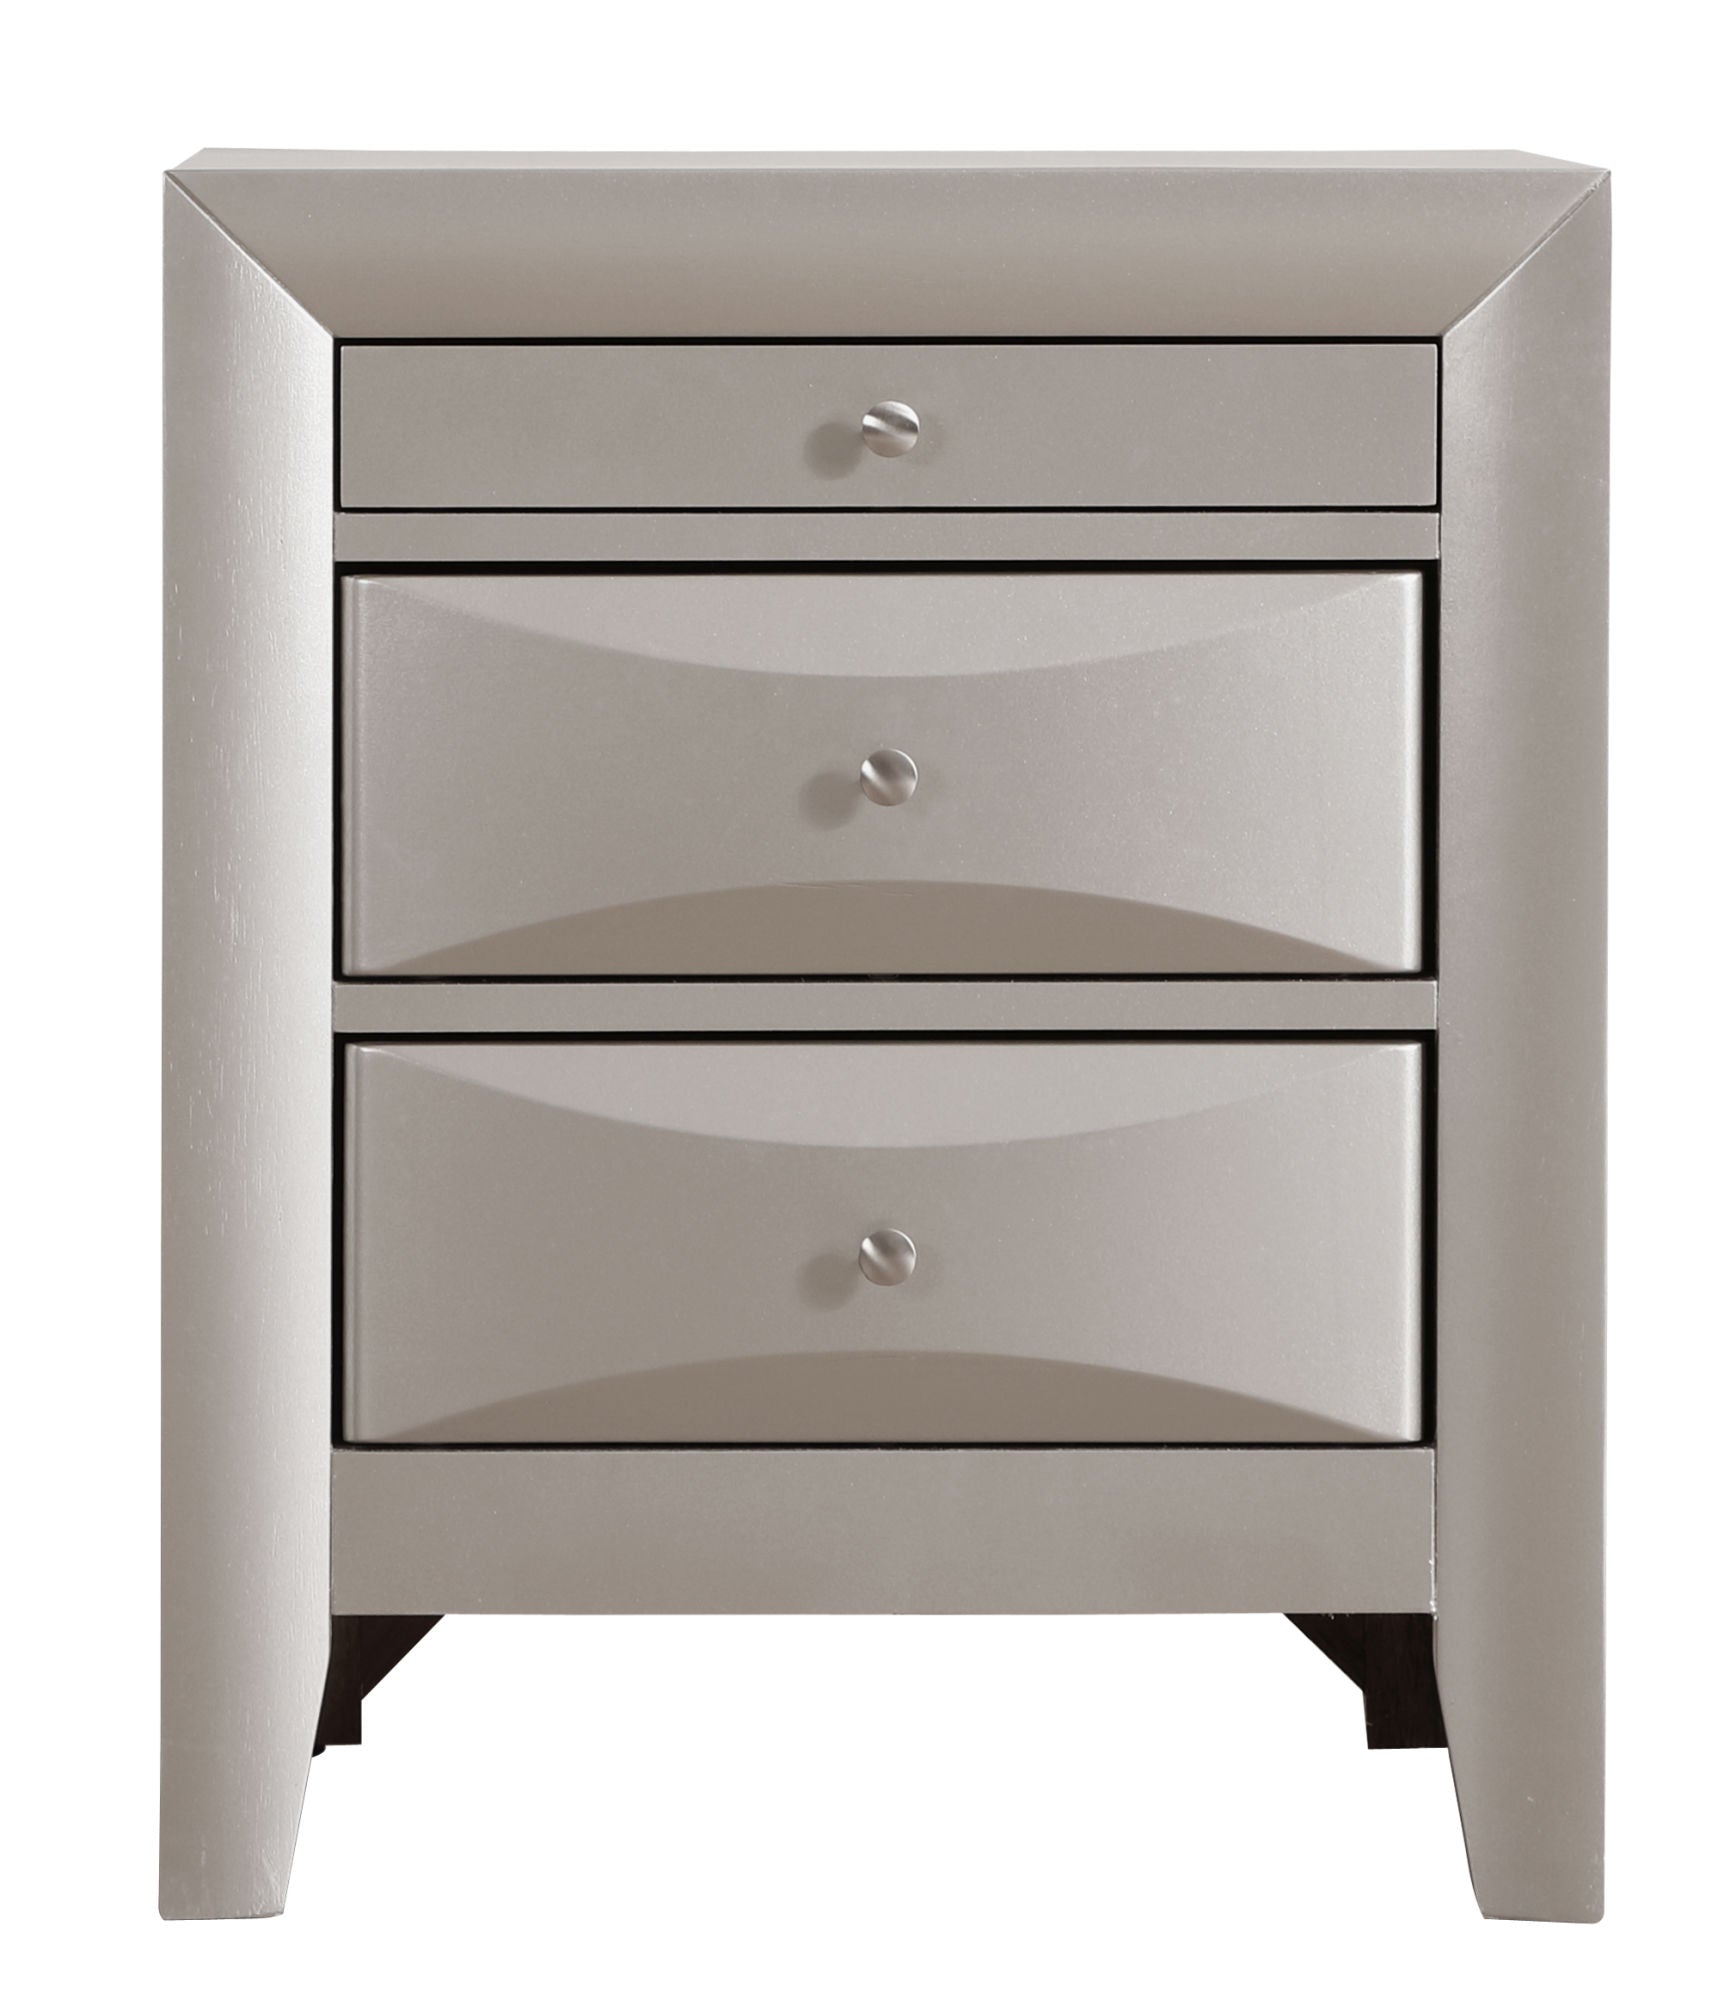 Glory Furniture Marilla G1503-N Nightstand , Silver Champagne Home Decor by Design